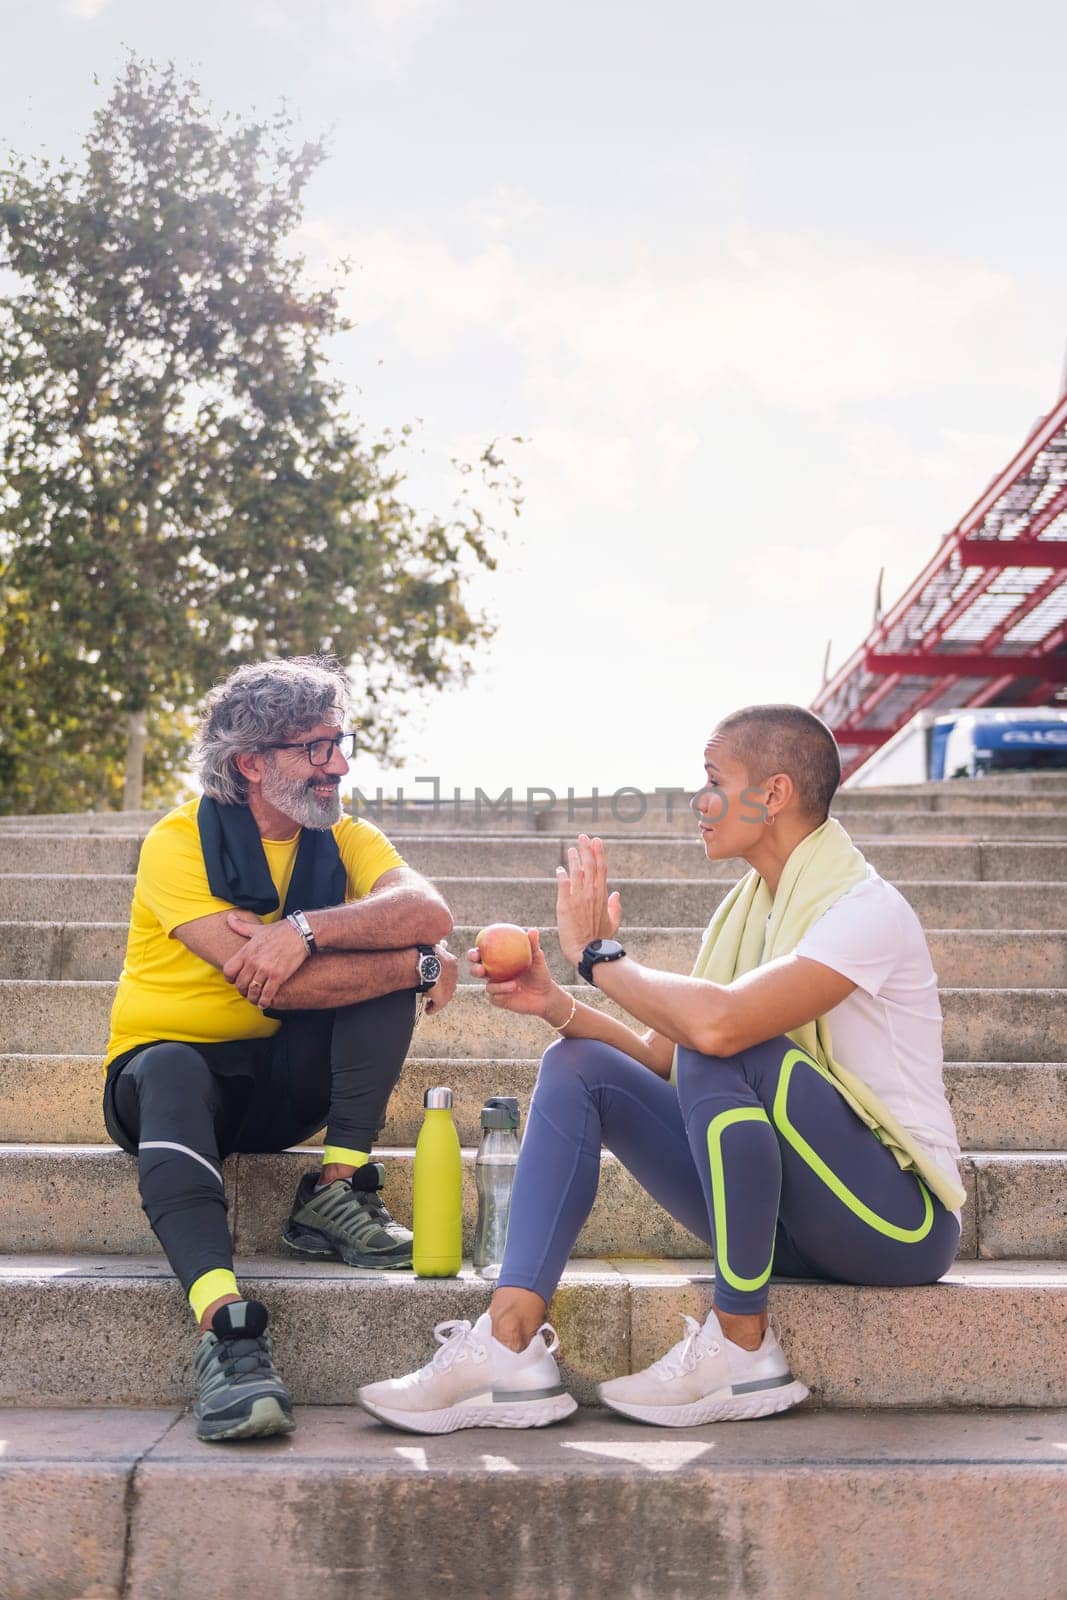 senior sports man rests chatting with his personal trainer after a hard workout, concept of healthy and active lifestyle in the middle age, copy space for text